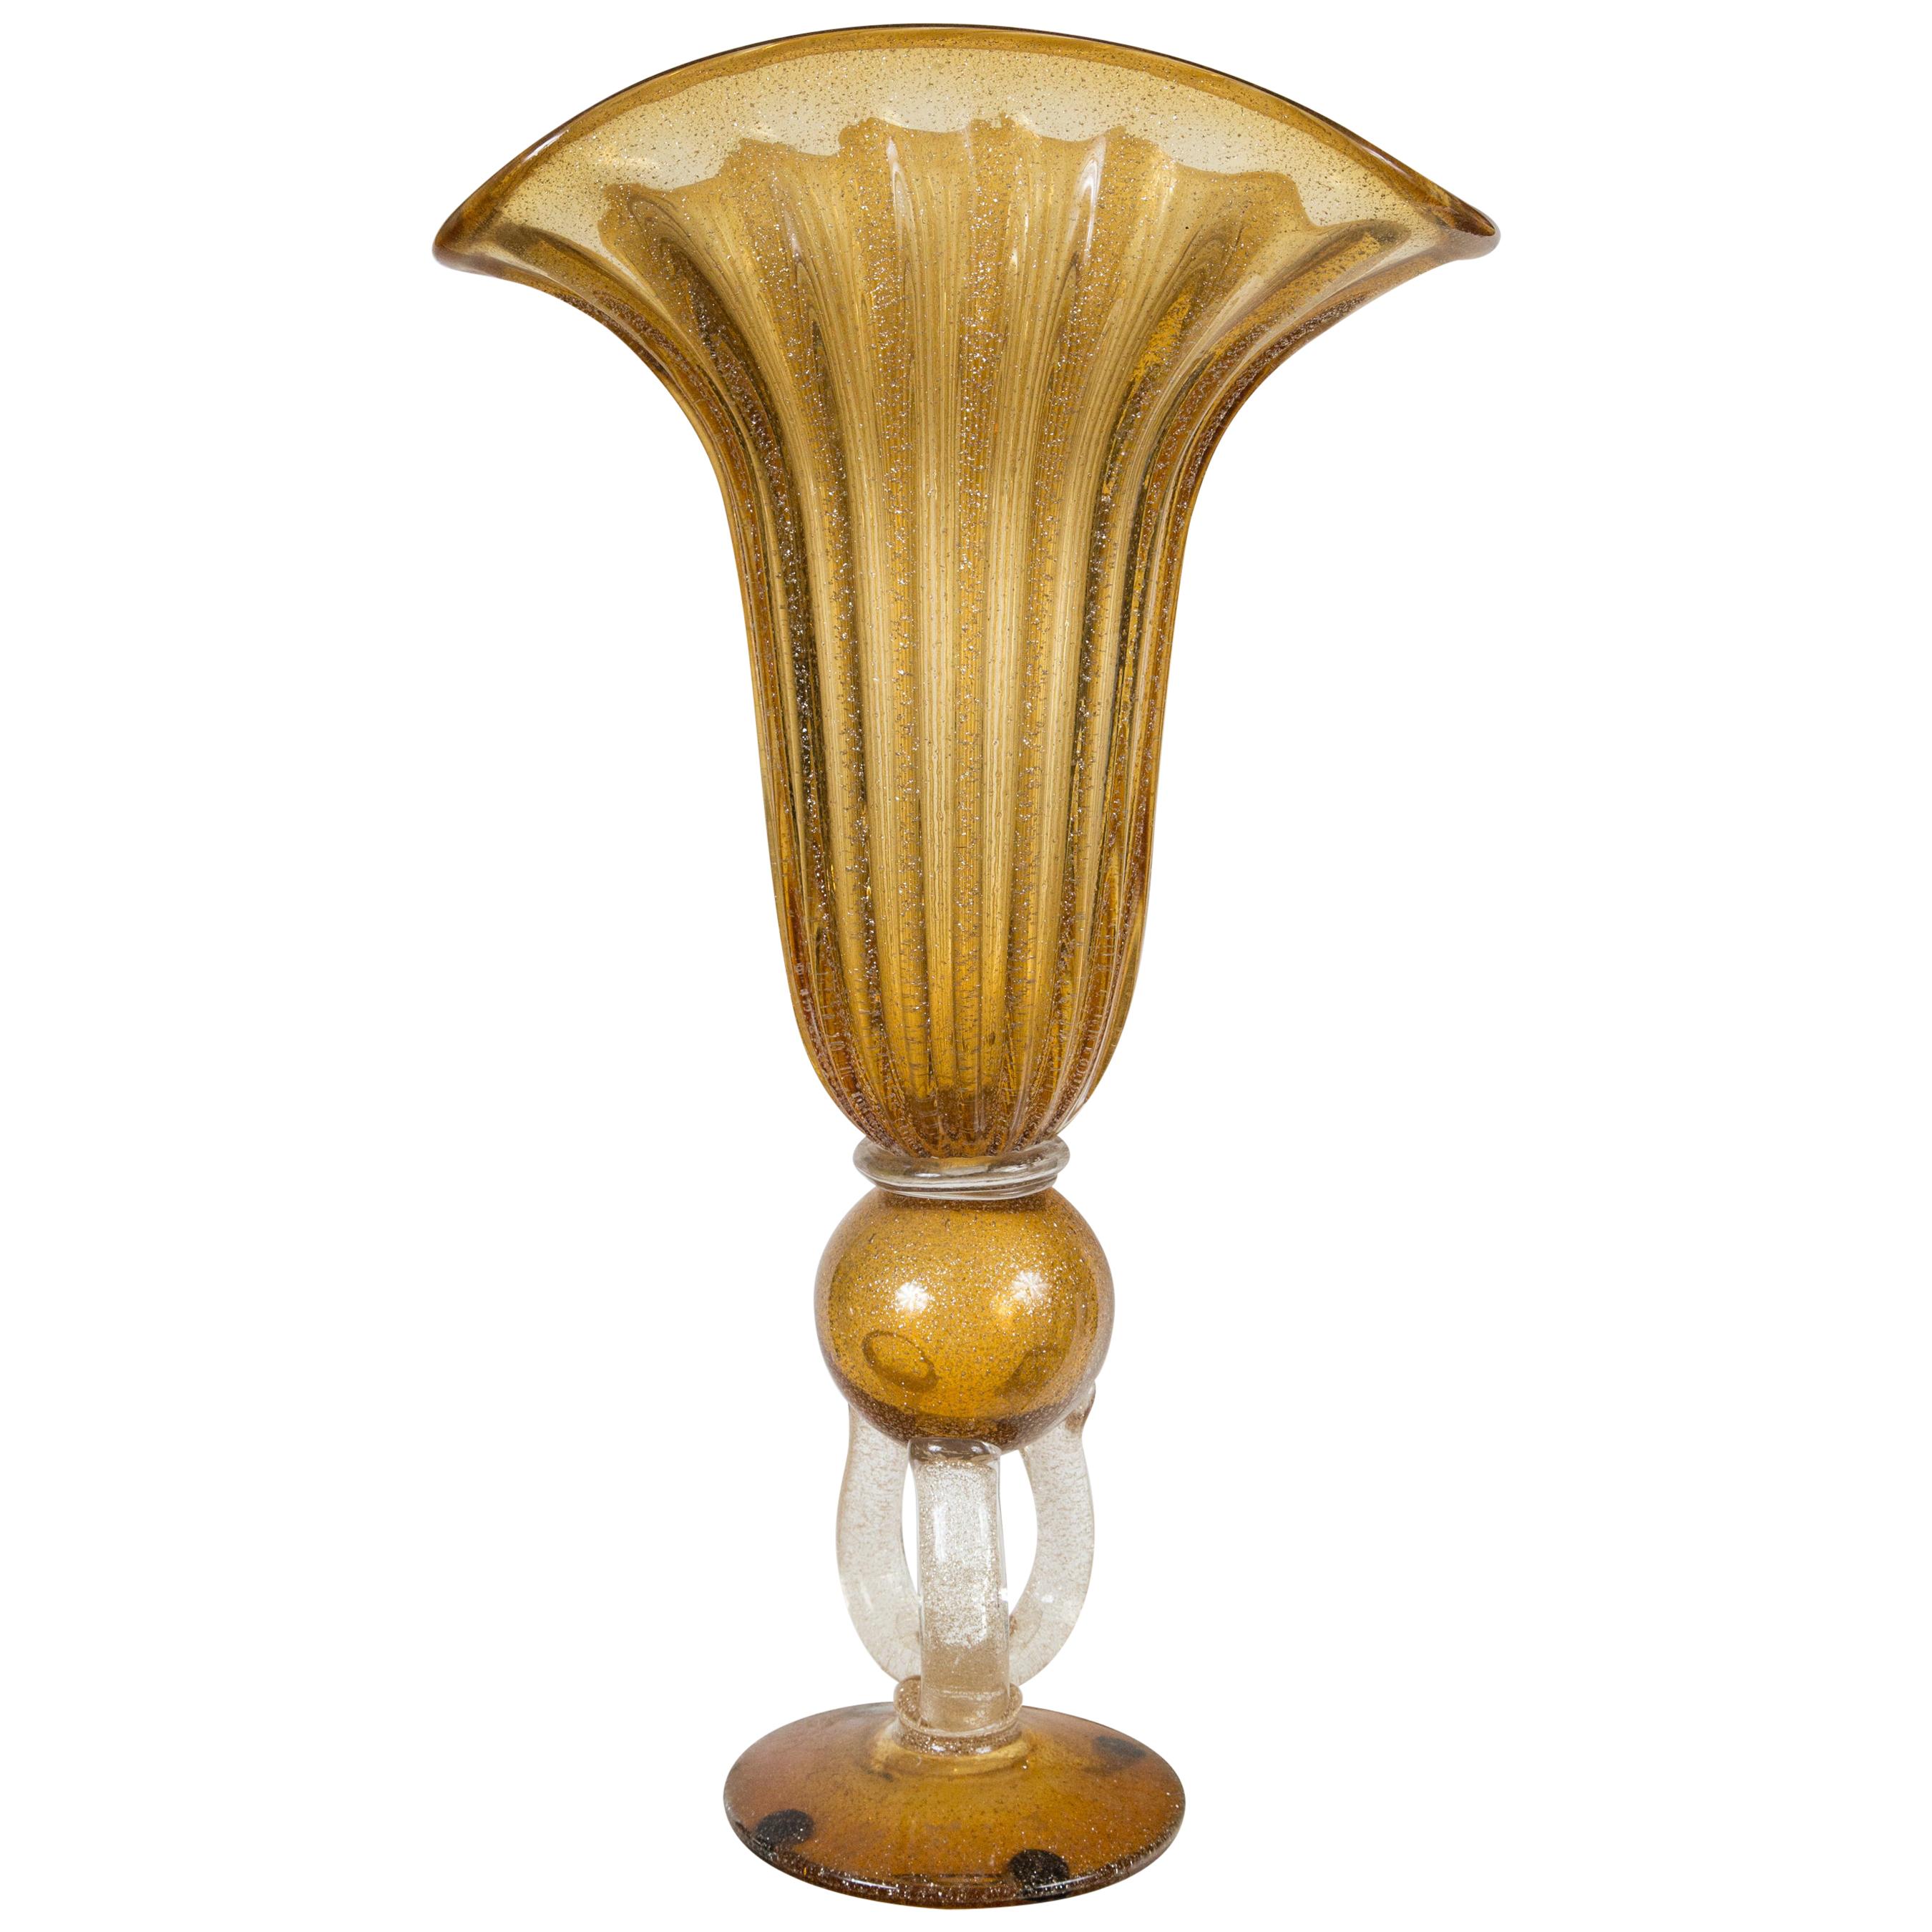 Fan Shaped Tall Glass Vase For Sale